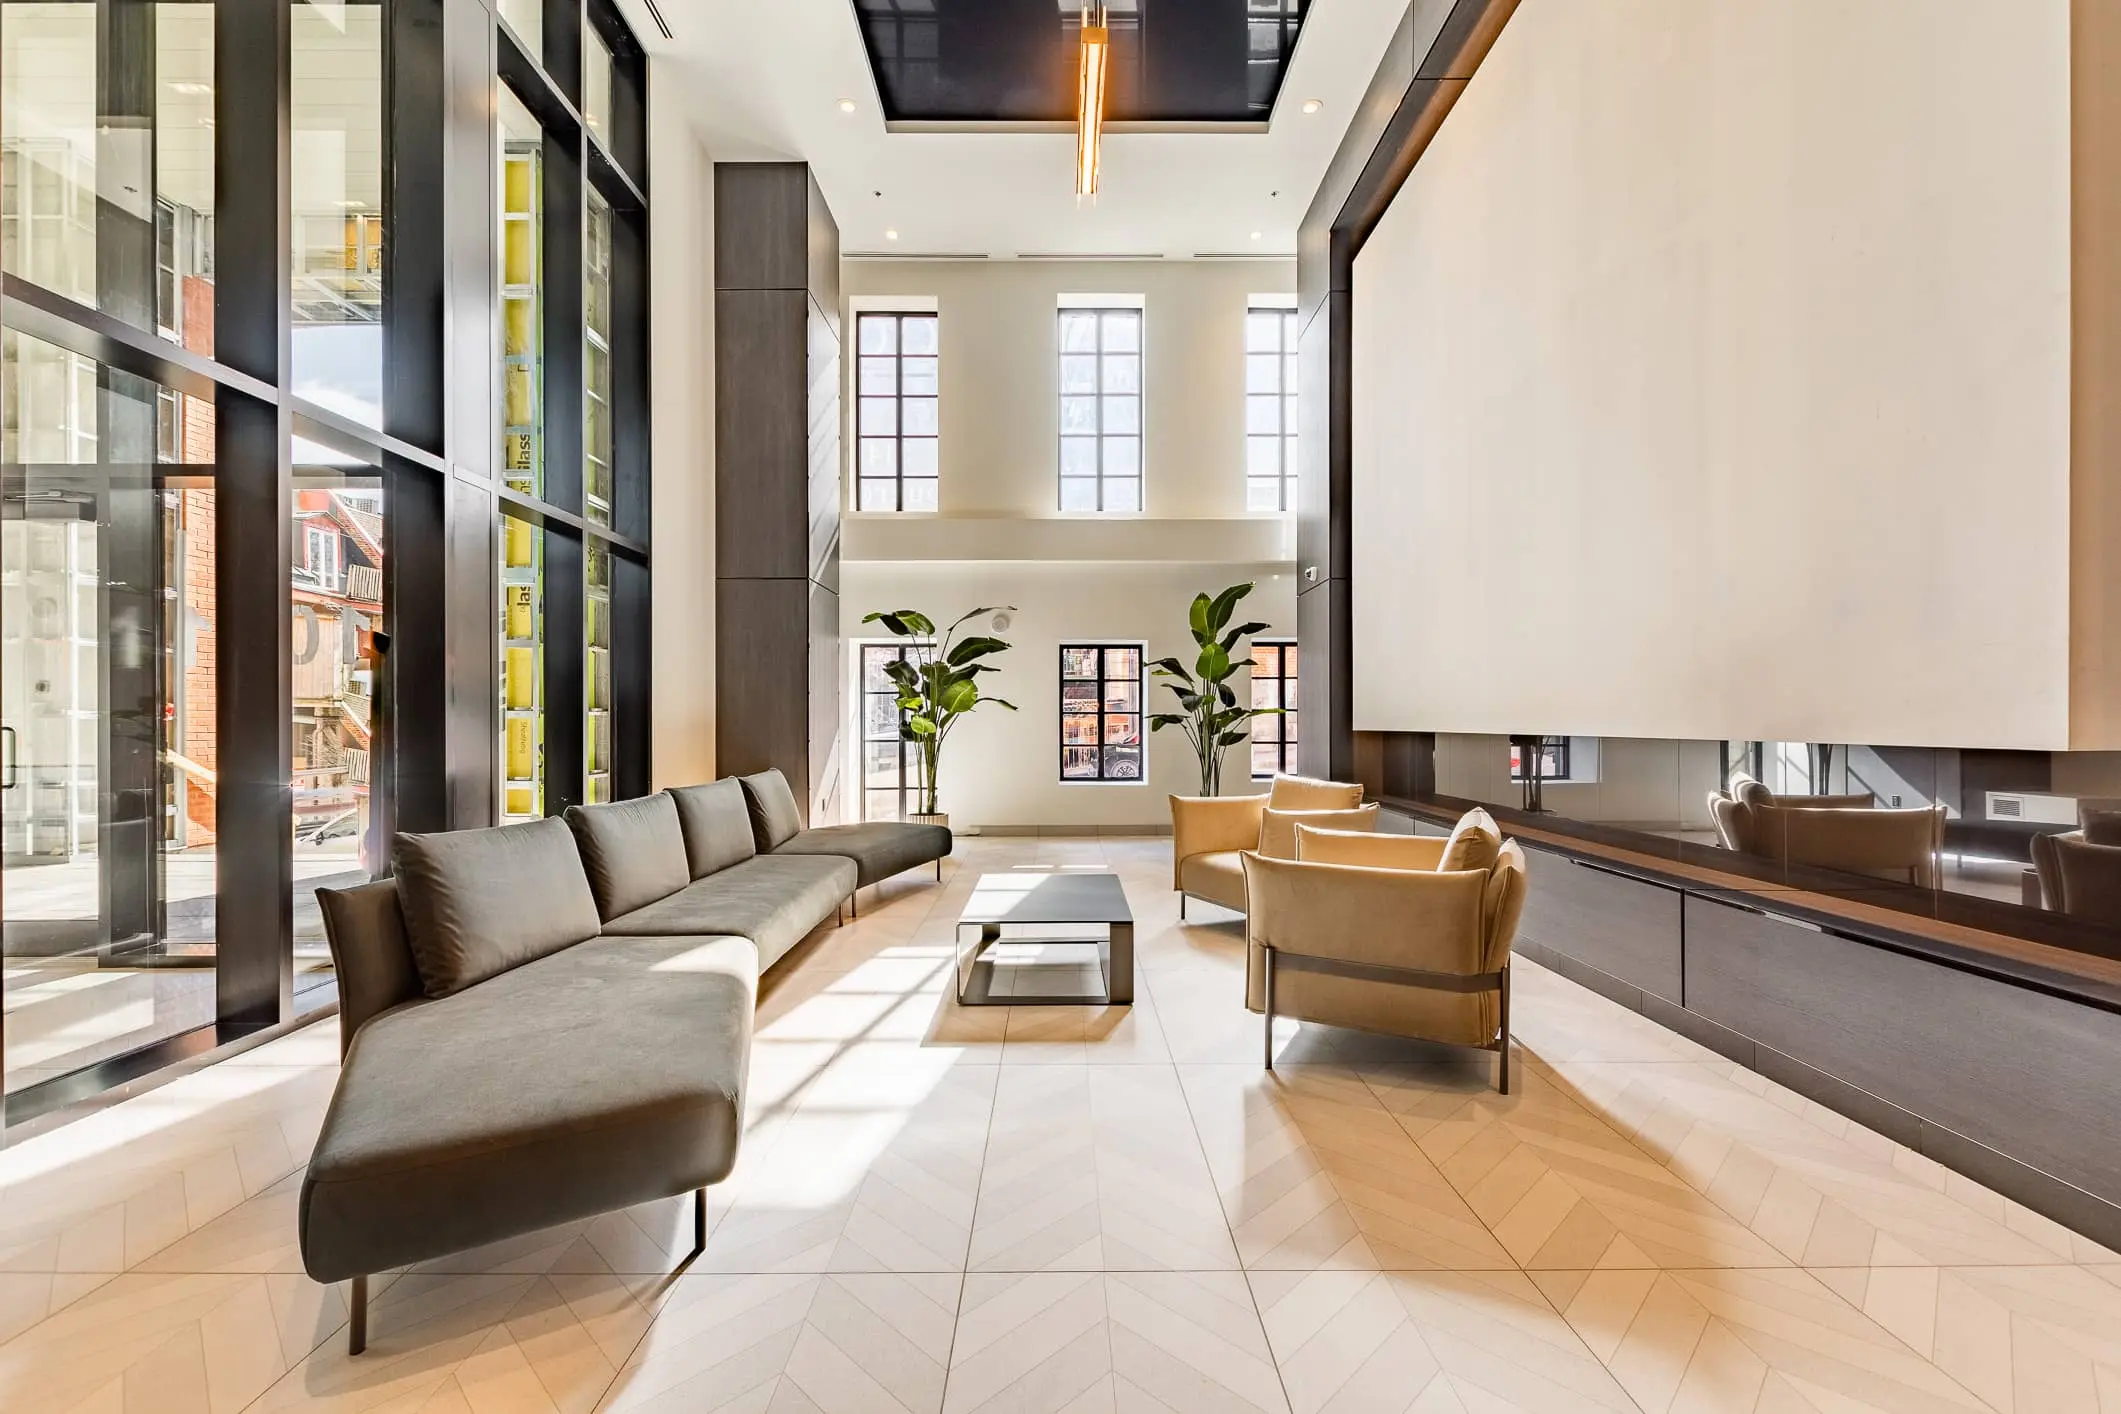 Le George apartments for rent downtown Montreal- lobby 2 Vues d_ensemble by Kptur 45